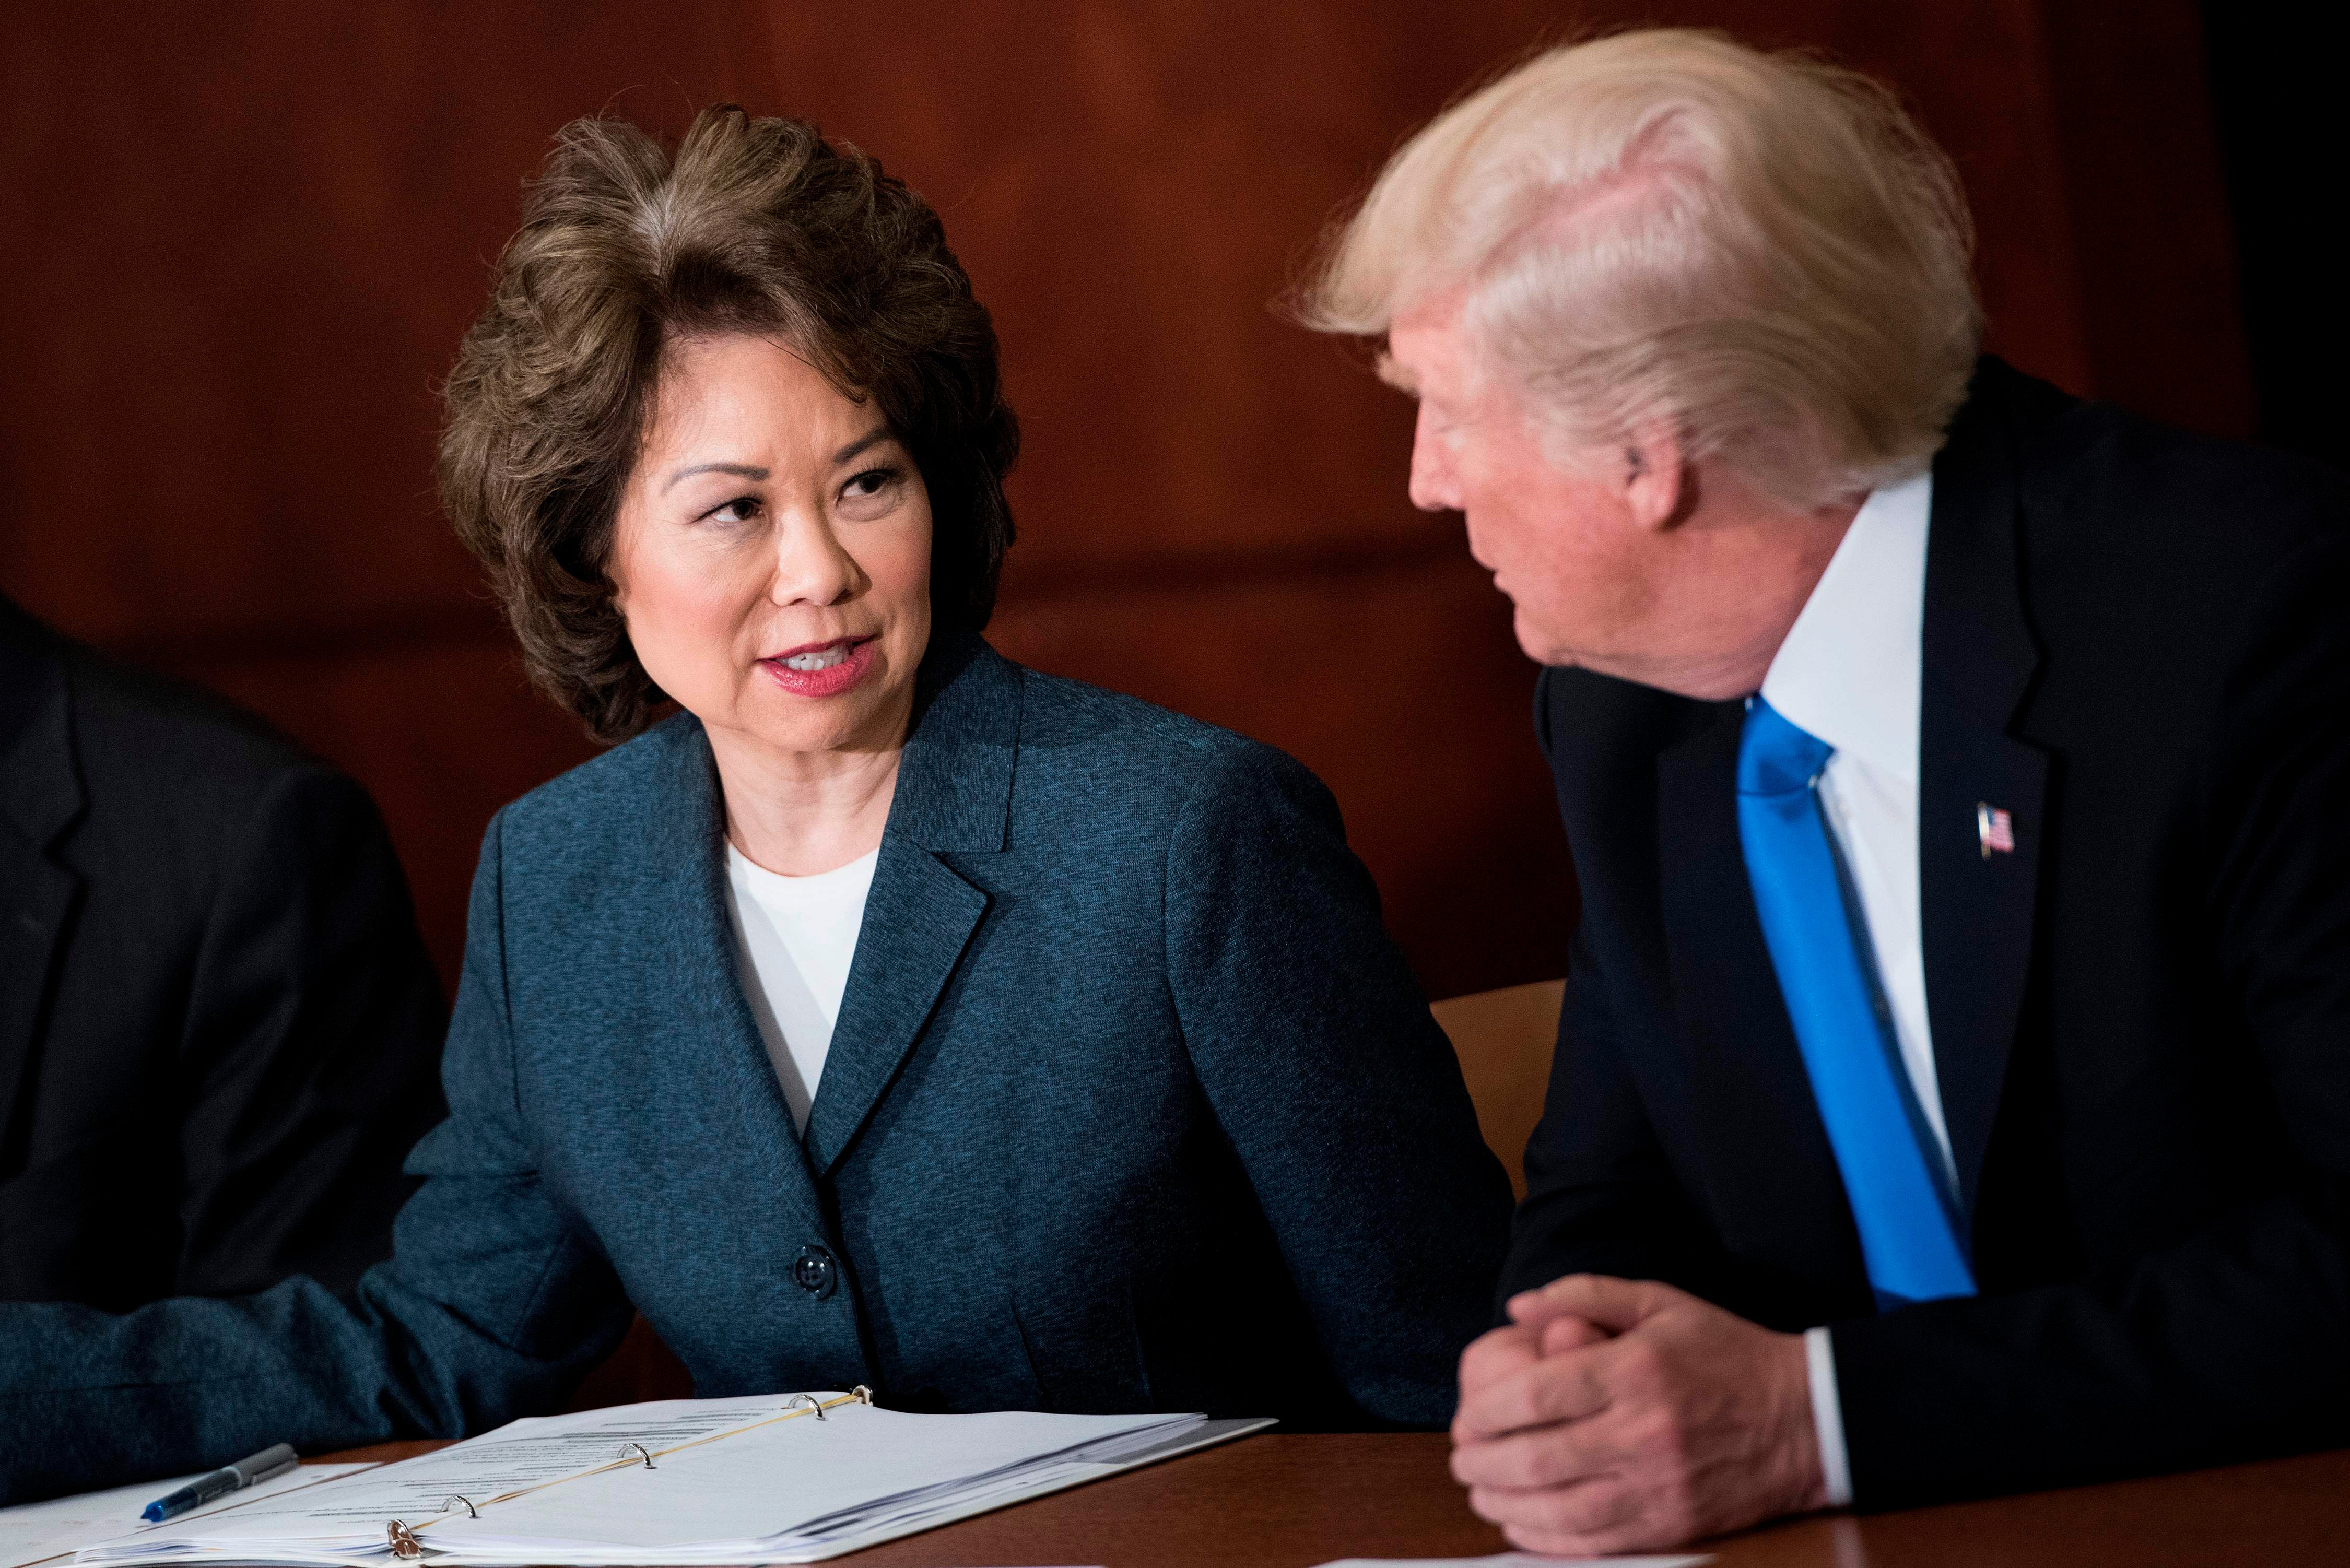 US Transportation Secretary Elaine Chao will resign, according to reports.